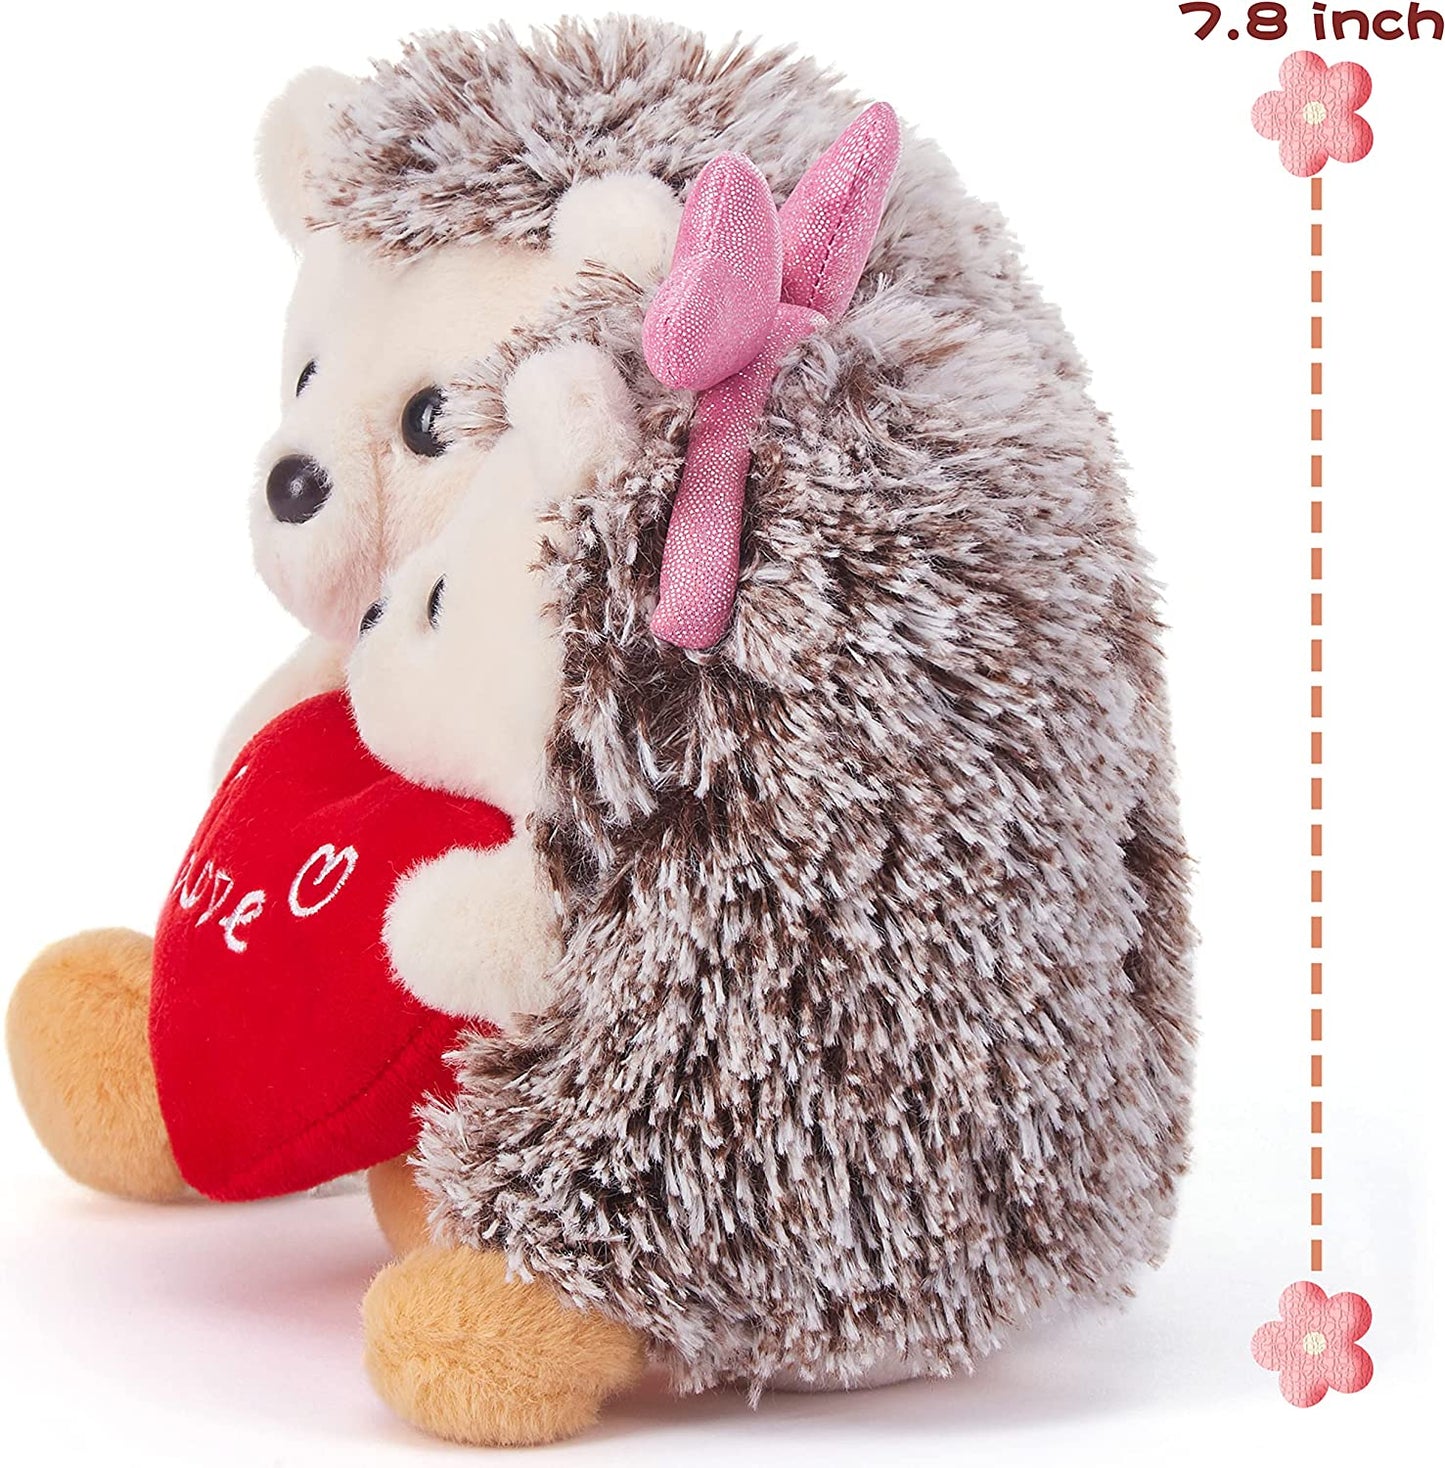 Hedgehog Stuffed Animal Plush Toy Holding Heart with Love Heart,Pair of Cute 20Cm Plushie Soft Small Toy,Valentine’S Day Gifts for Girlfriend